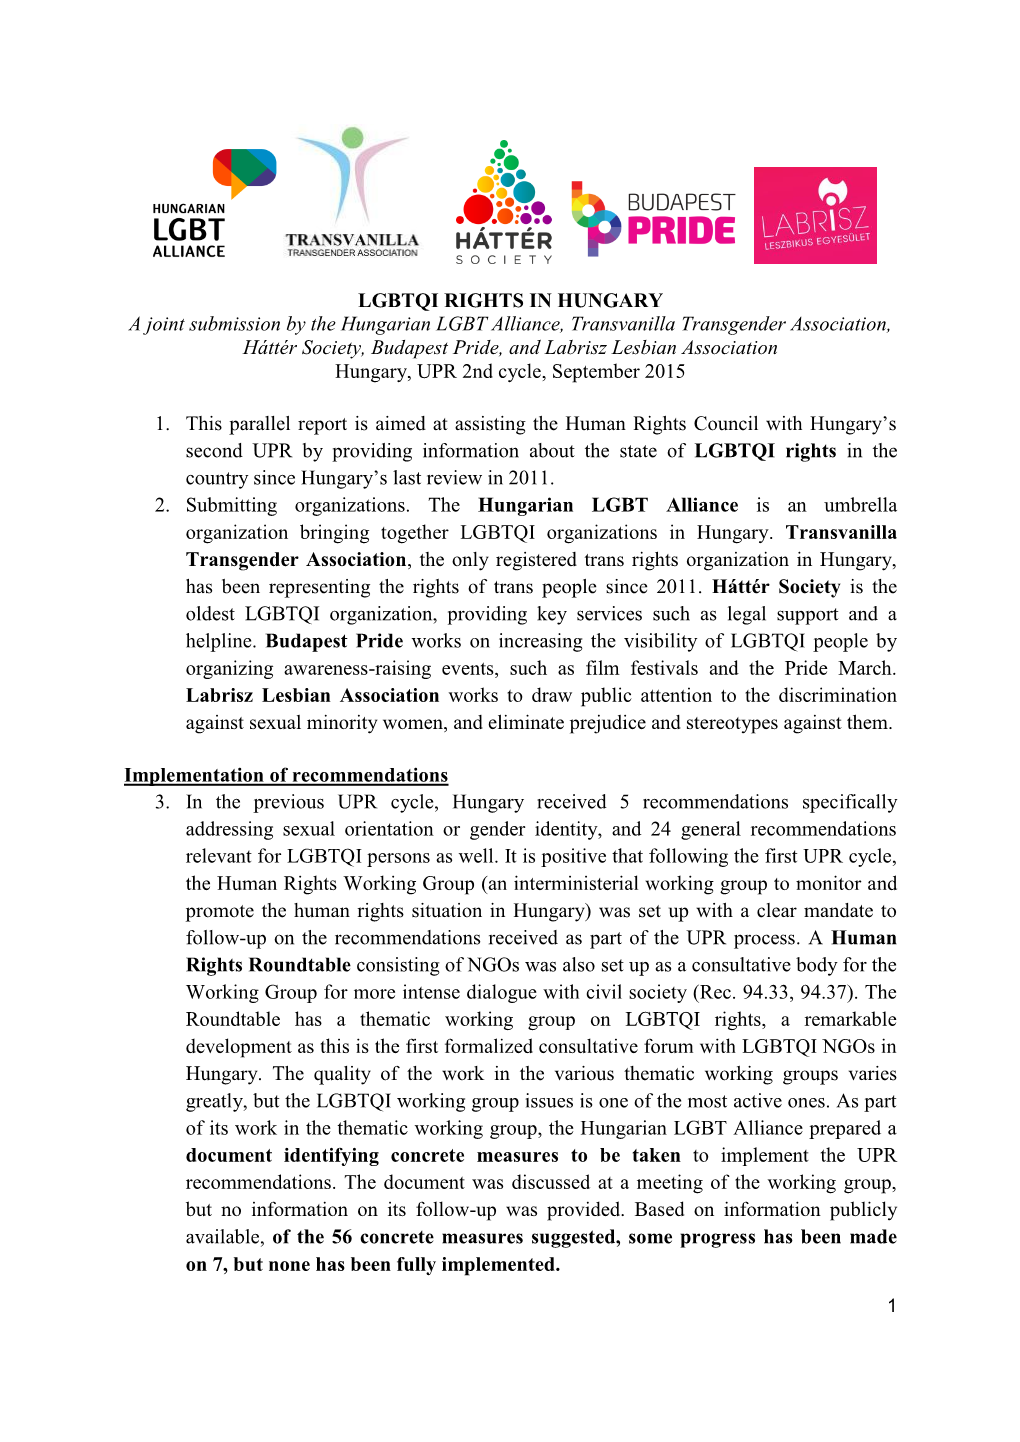 LGBTQI RIGHTS in HUNGARY a Joint Submission by the Hungarian